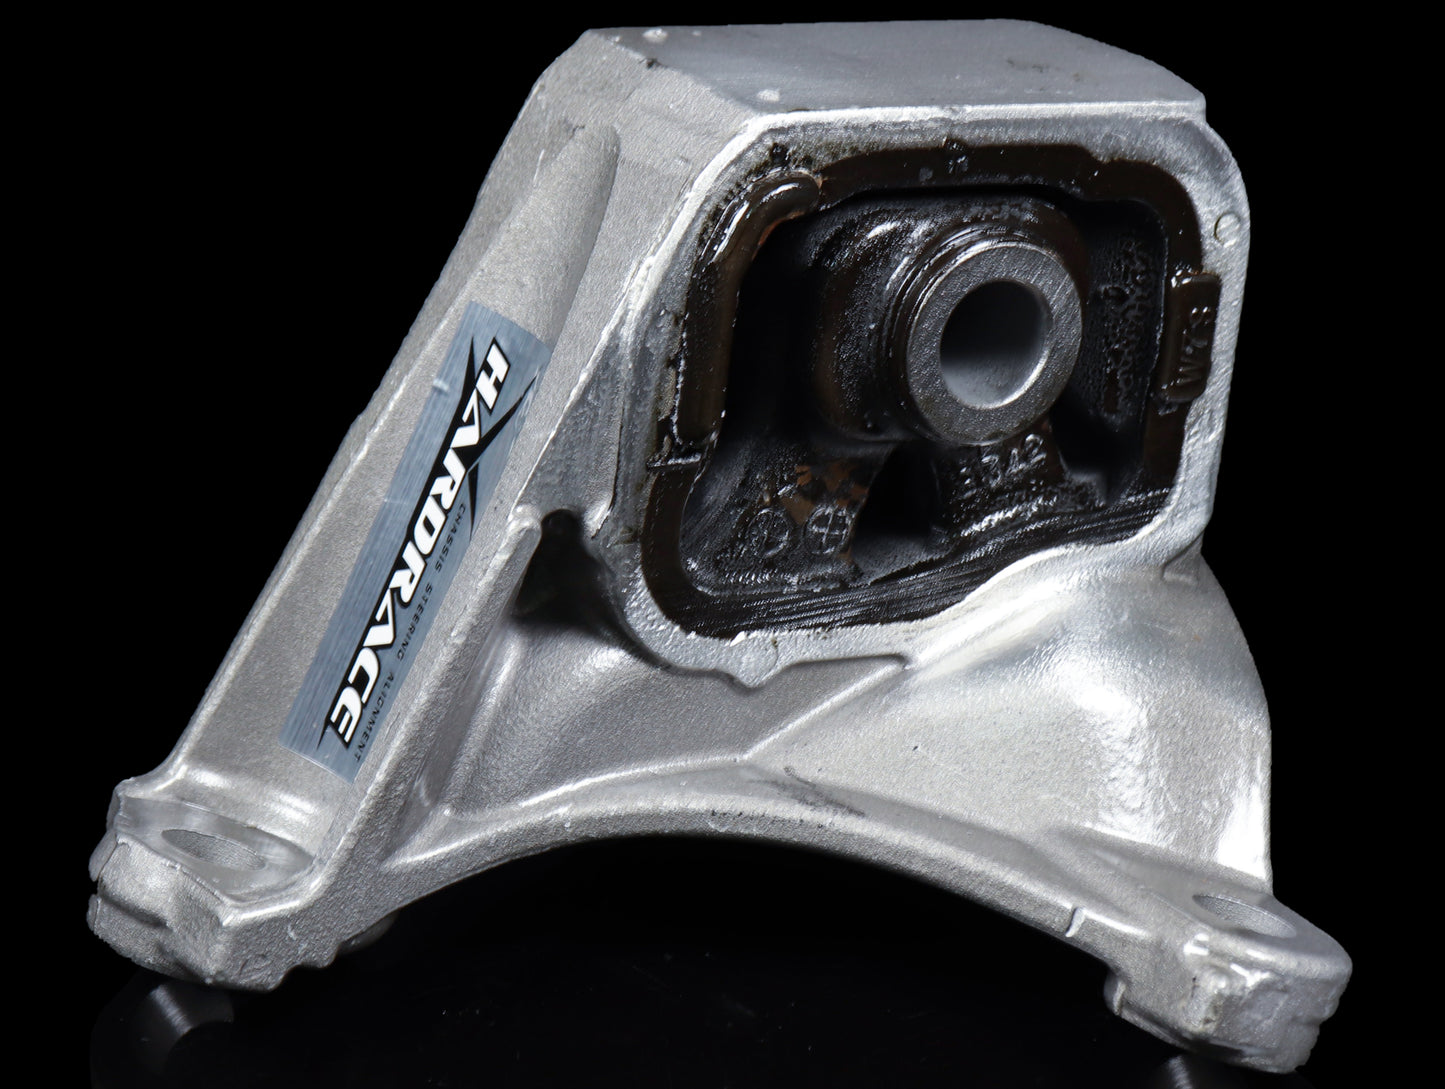 Hardrace Front Engine Mount (Racing) - 02-05 Civic Si / 02-06 RSX